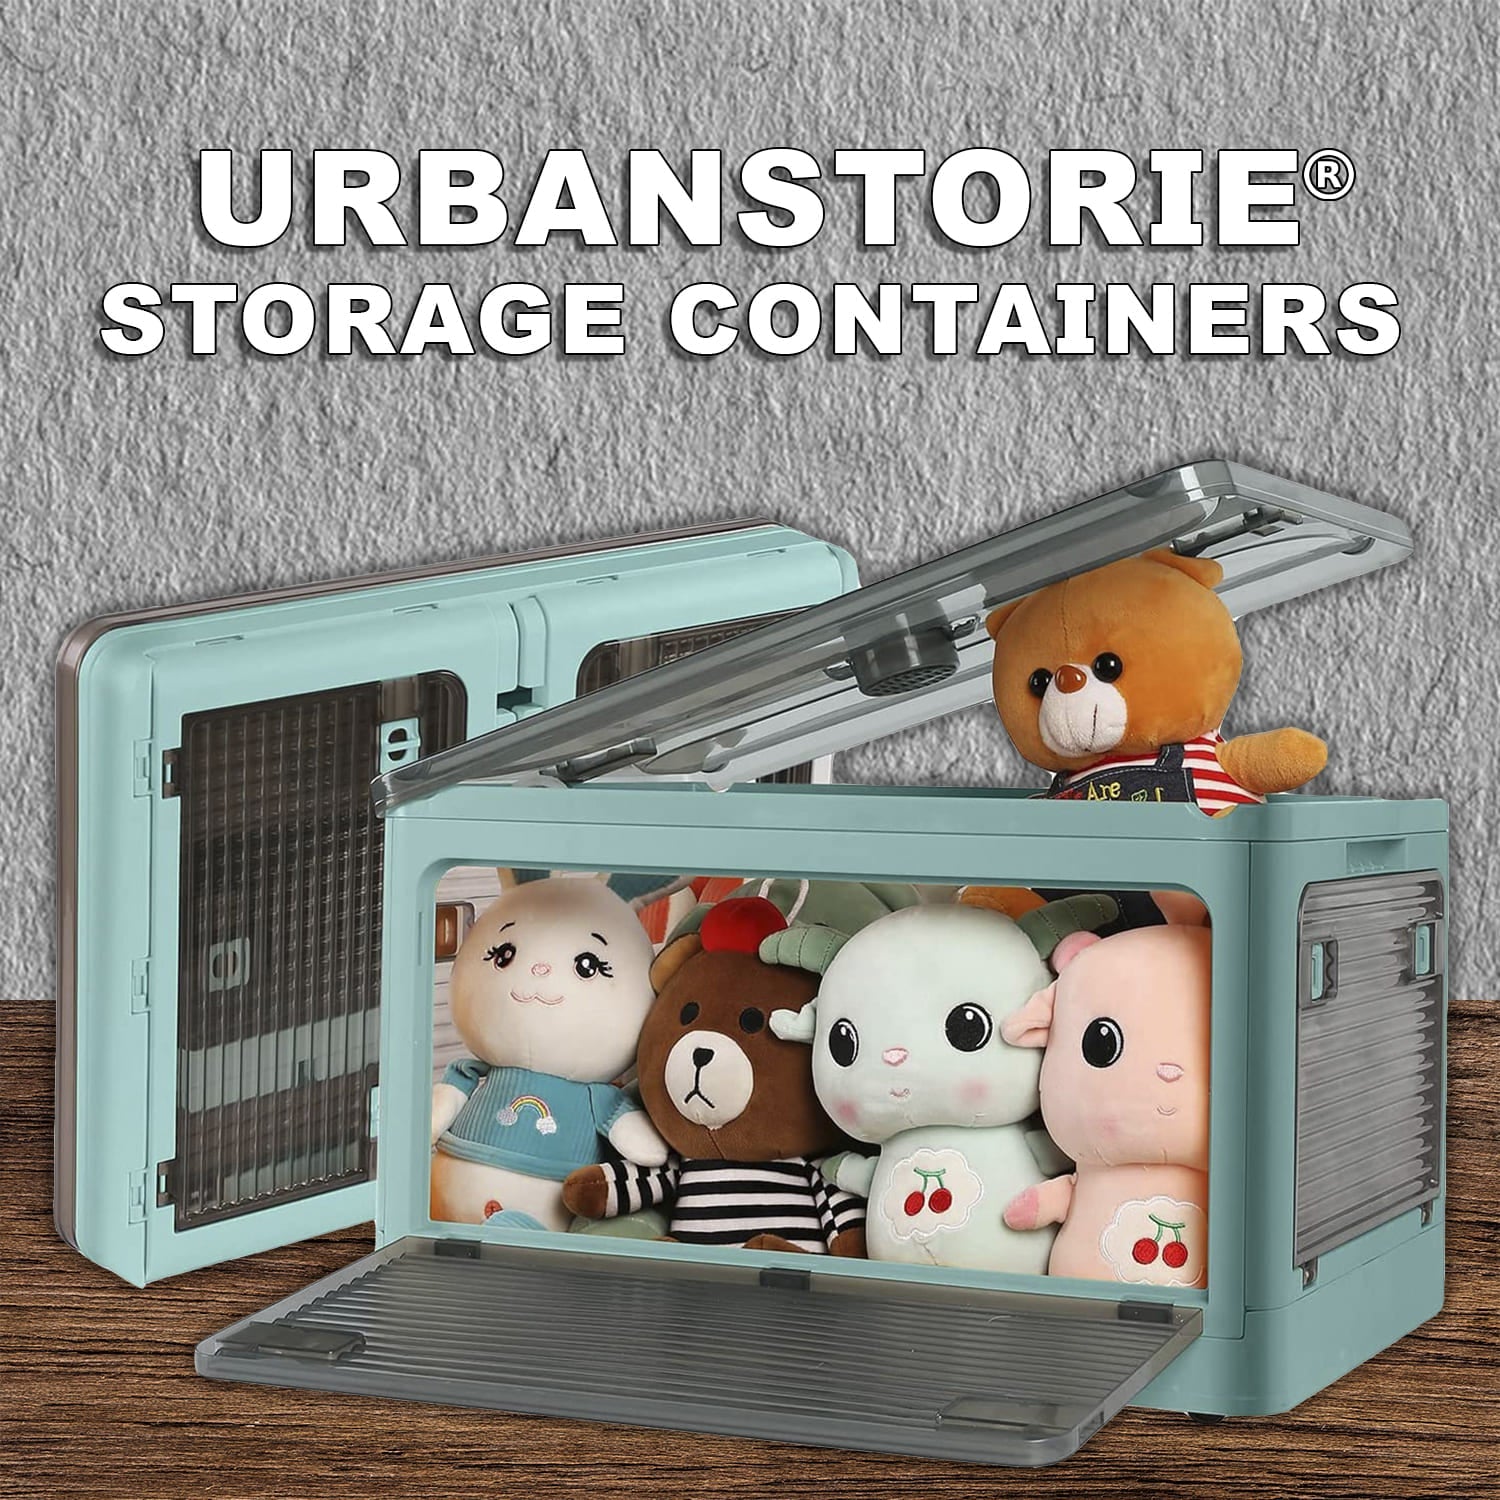 UrbanStori Plastic Storage Containers, Store your Clothes, Sarees, Blankets, Winter Items, Toys or any Home Items